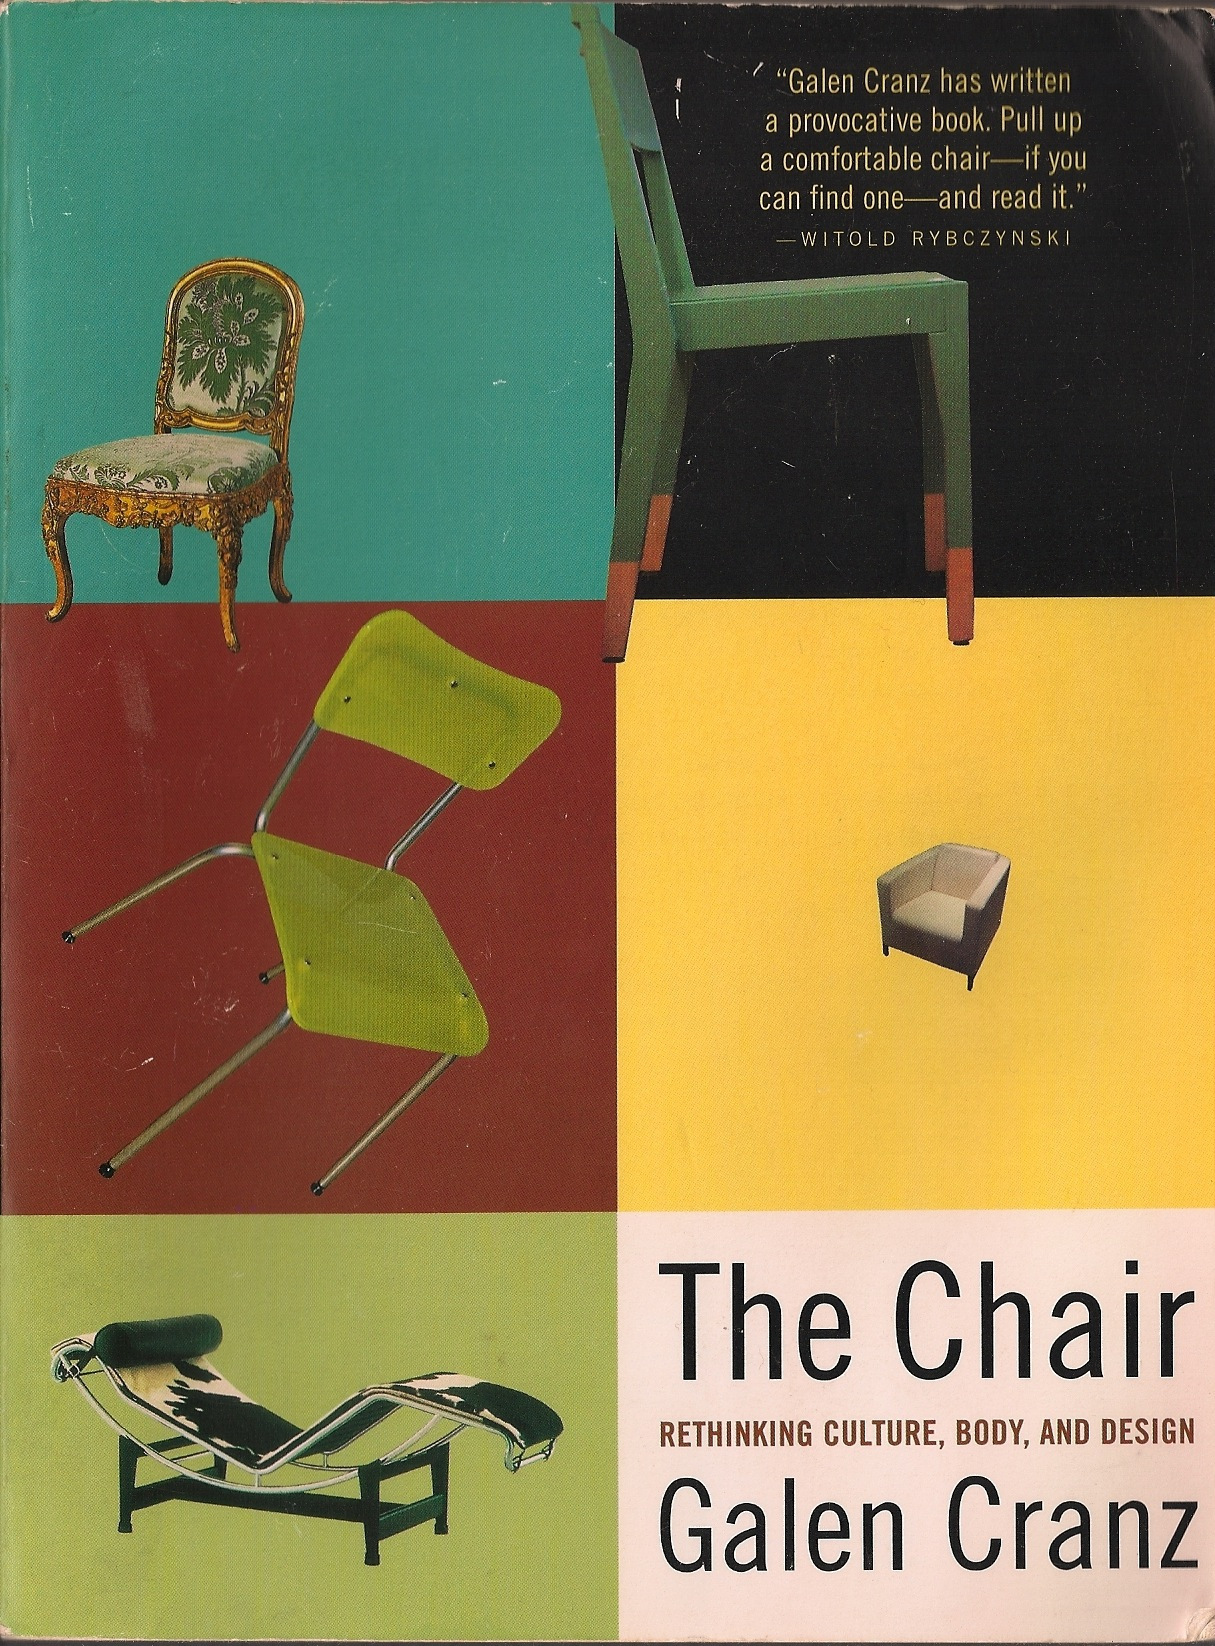 The Problem With The Chair